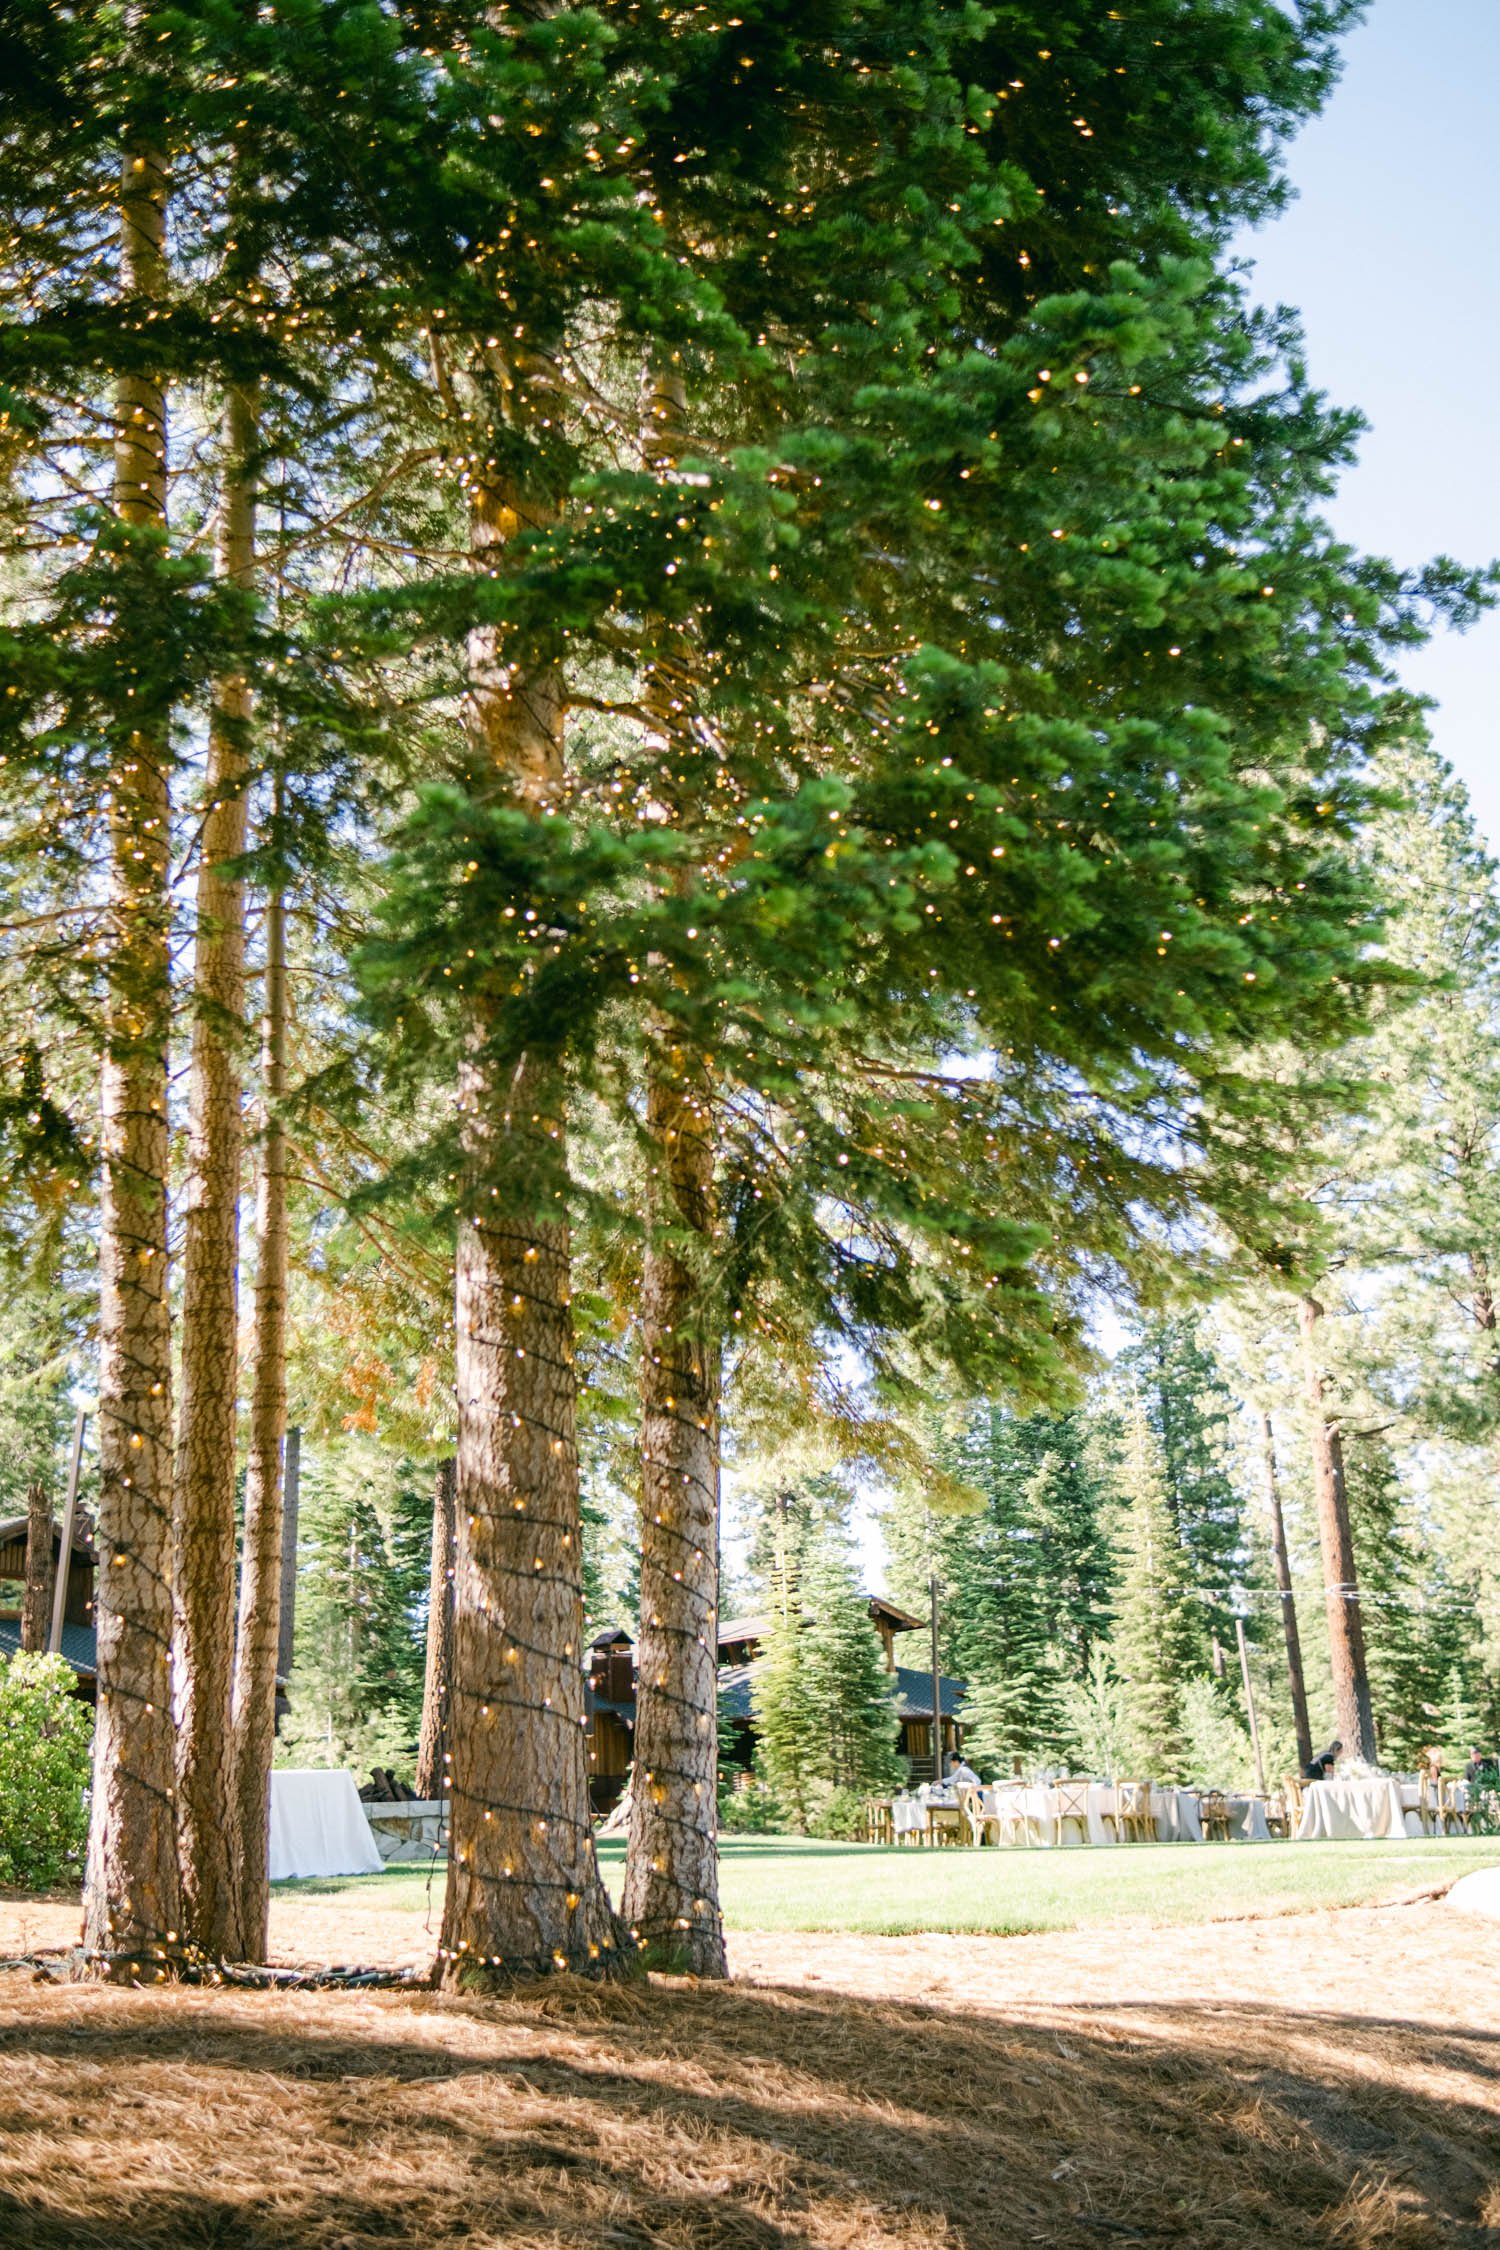 Martis Camp wedding, photo of a classic wedding theme in the forest